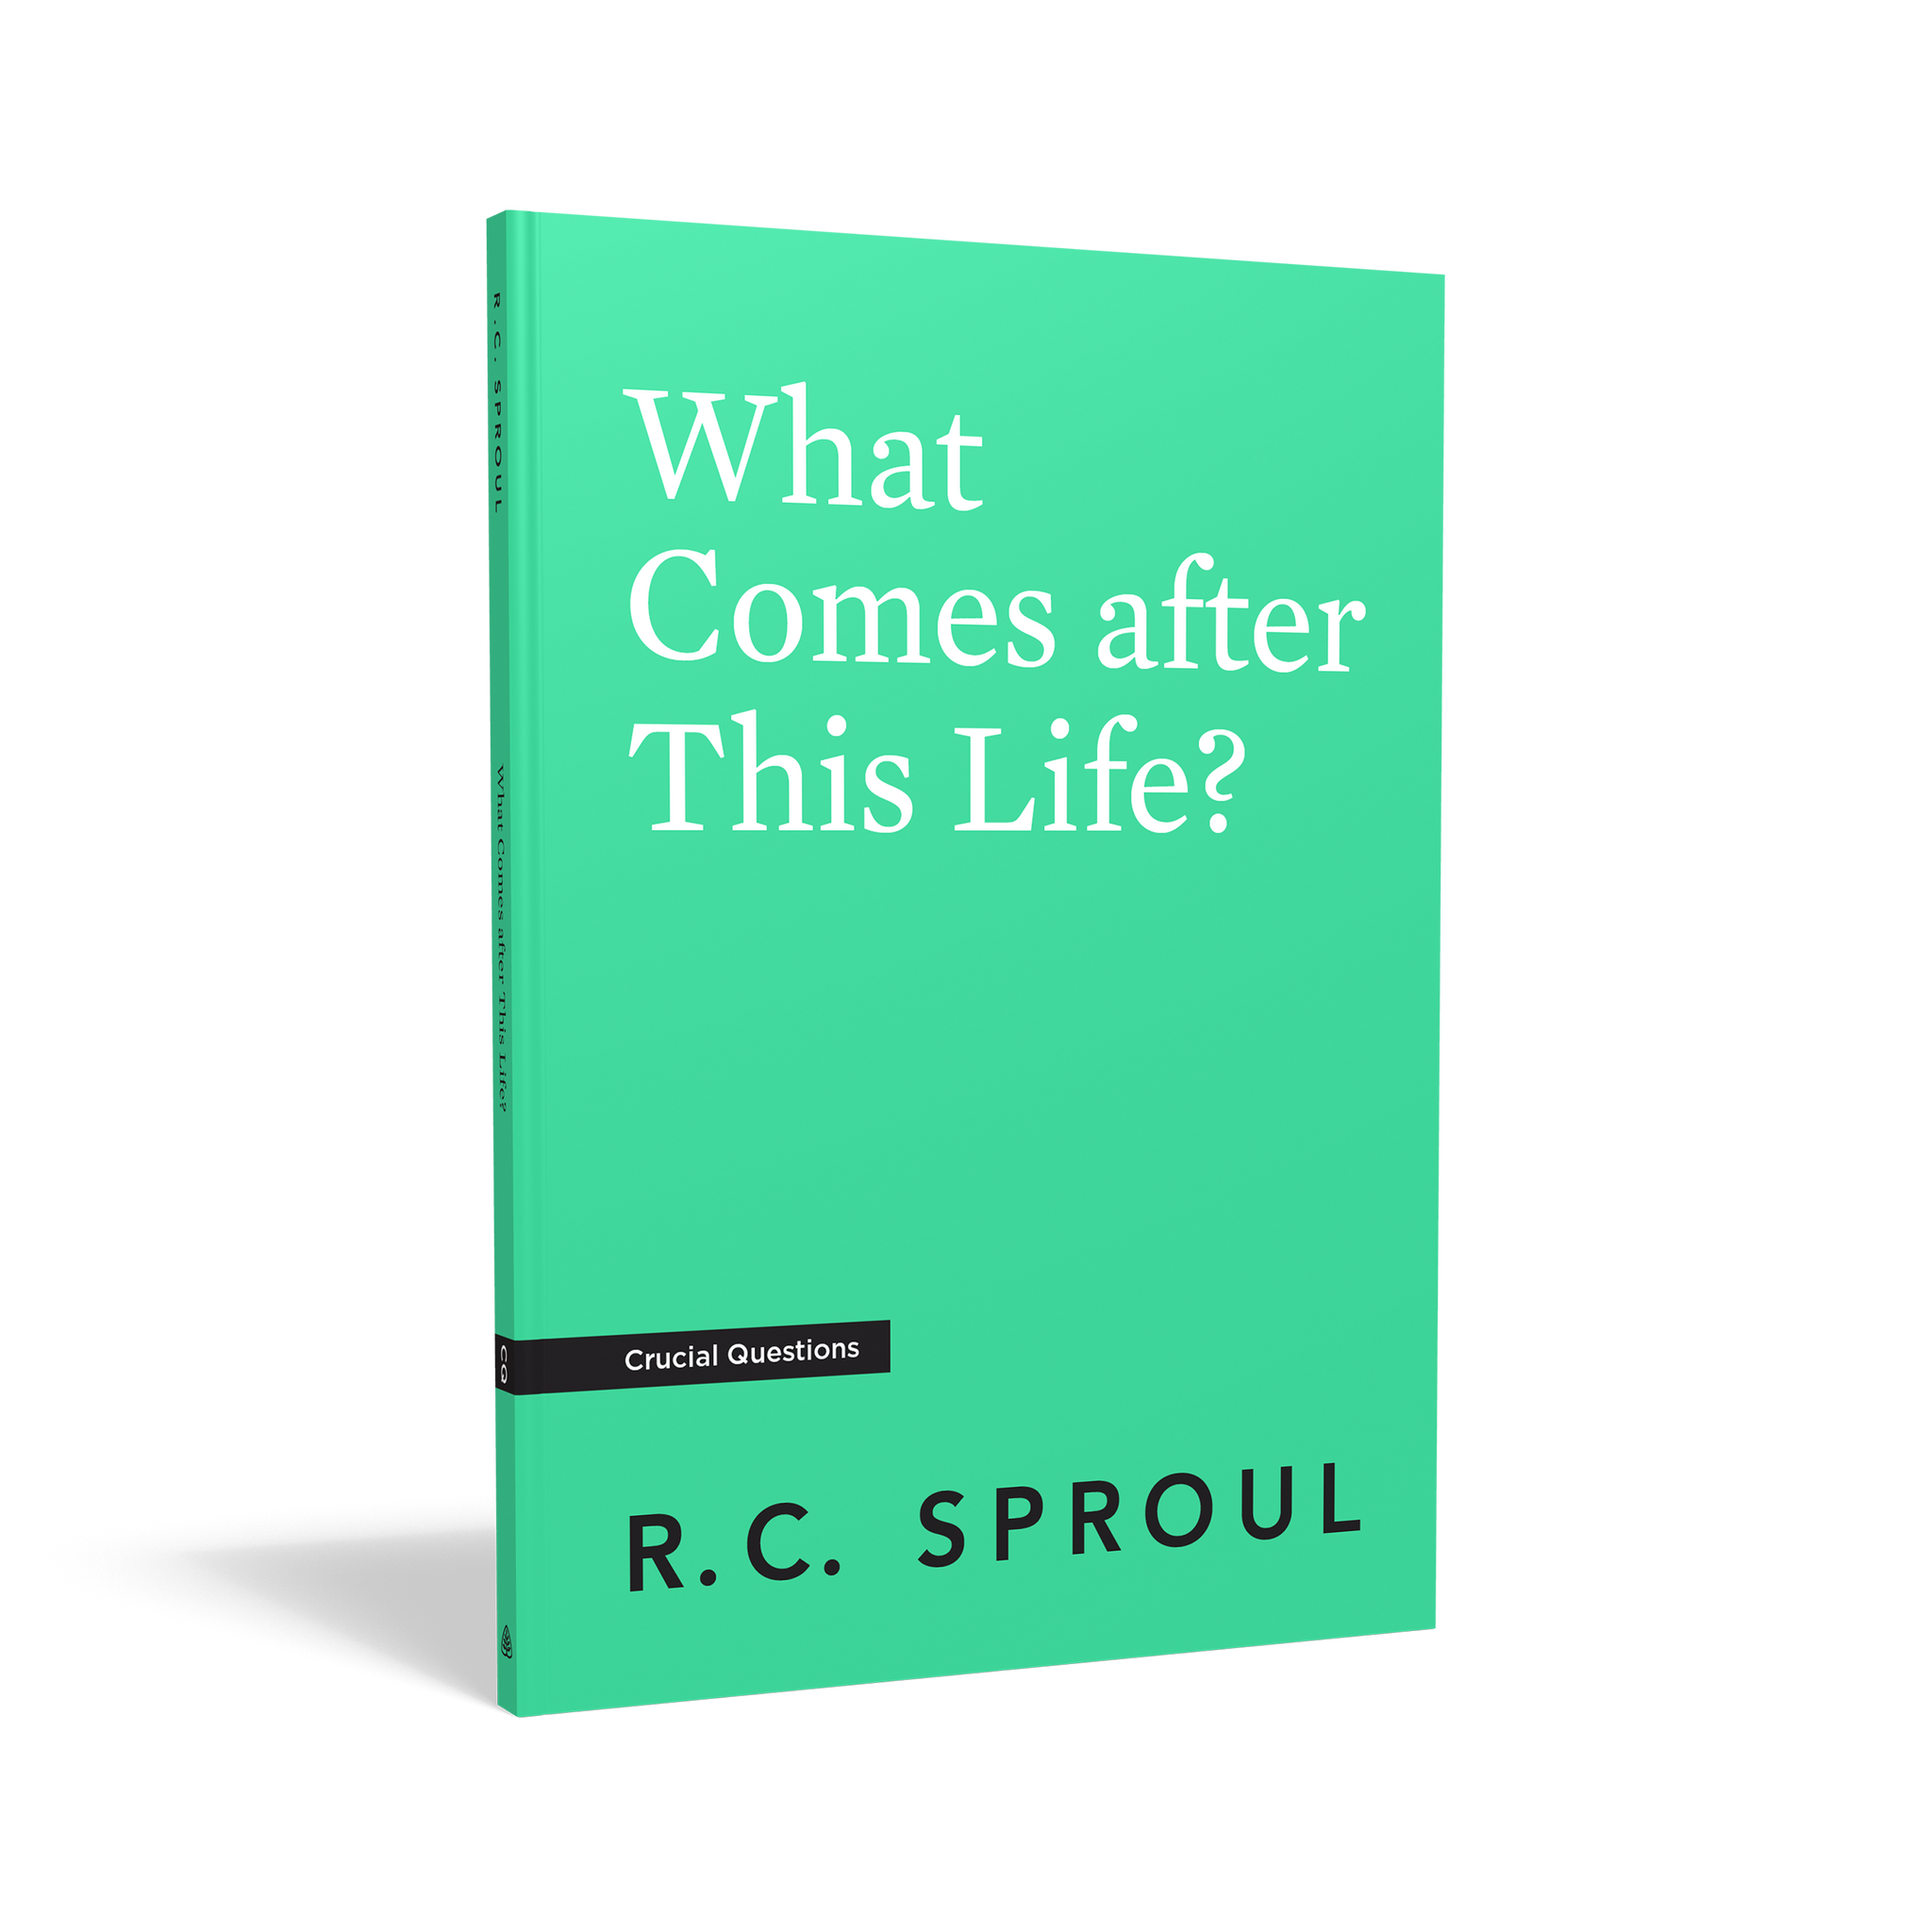 Crucial Questions - What Comes after This Life?